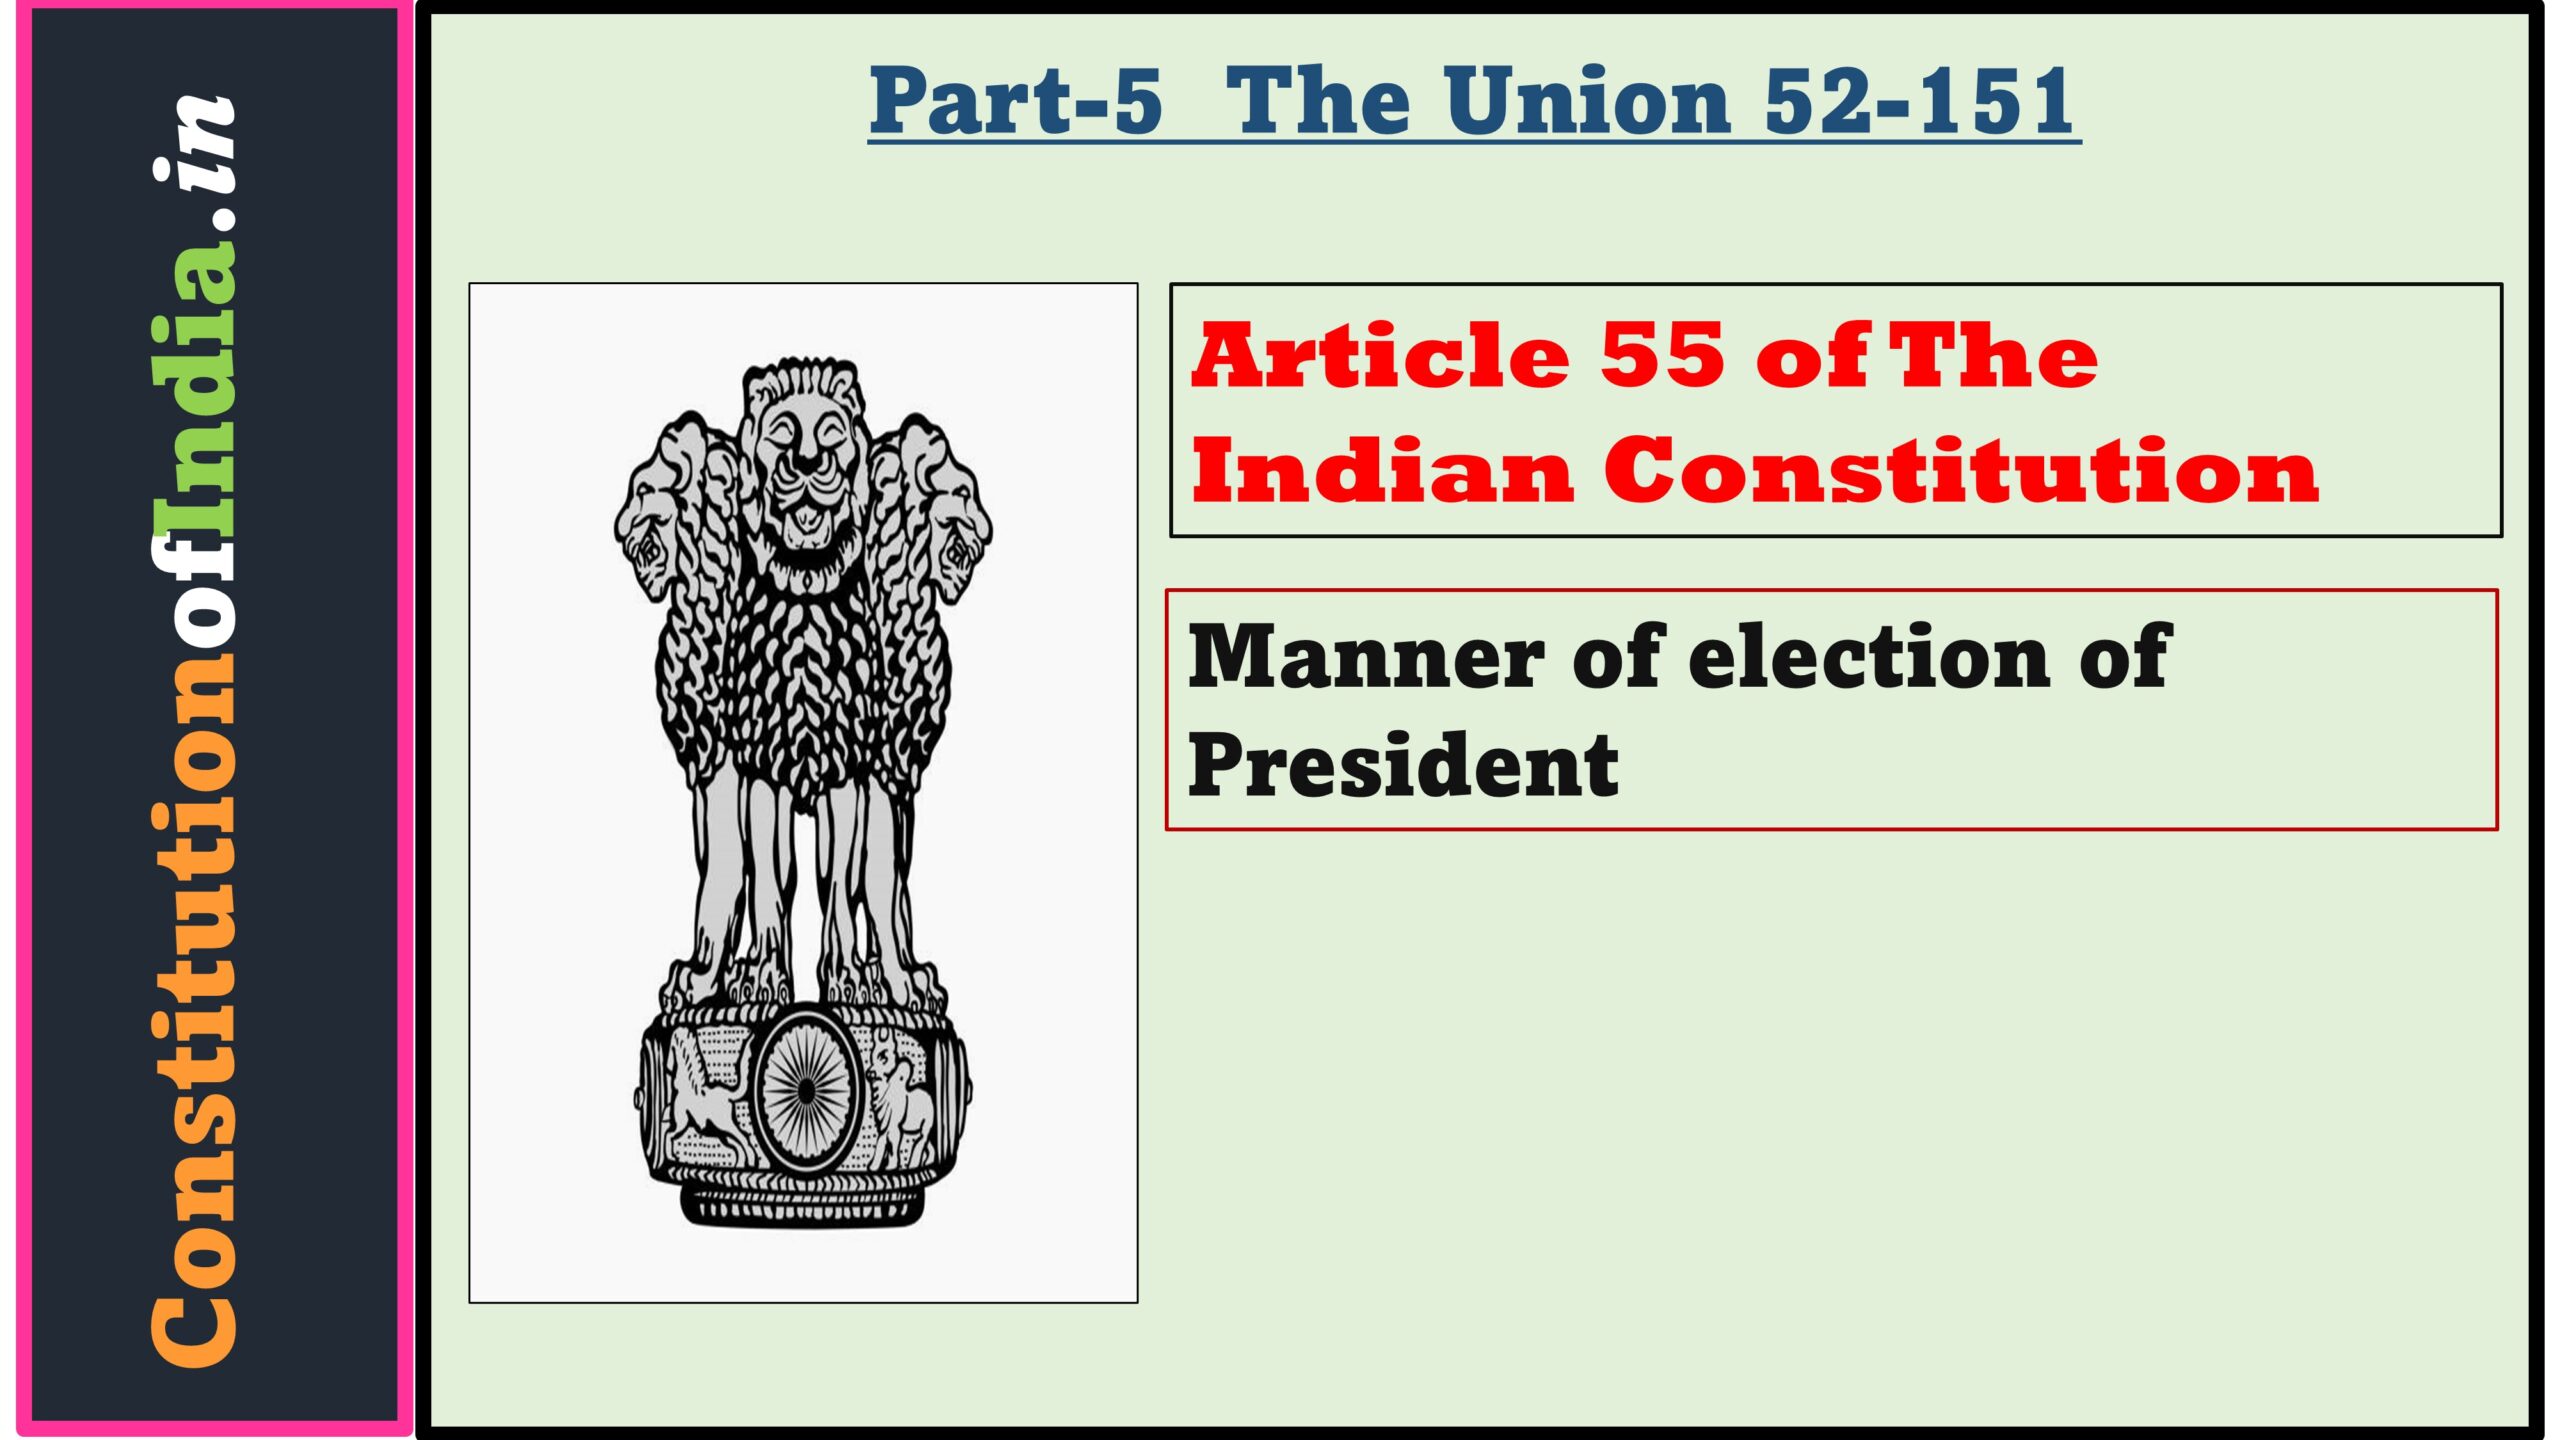 Article 55 of Indian Constitution: Manner of election of President.